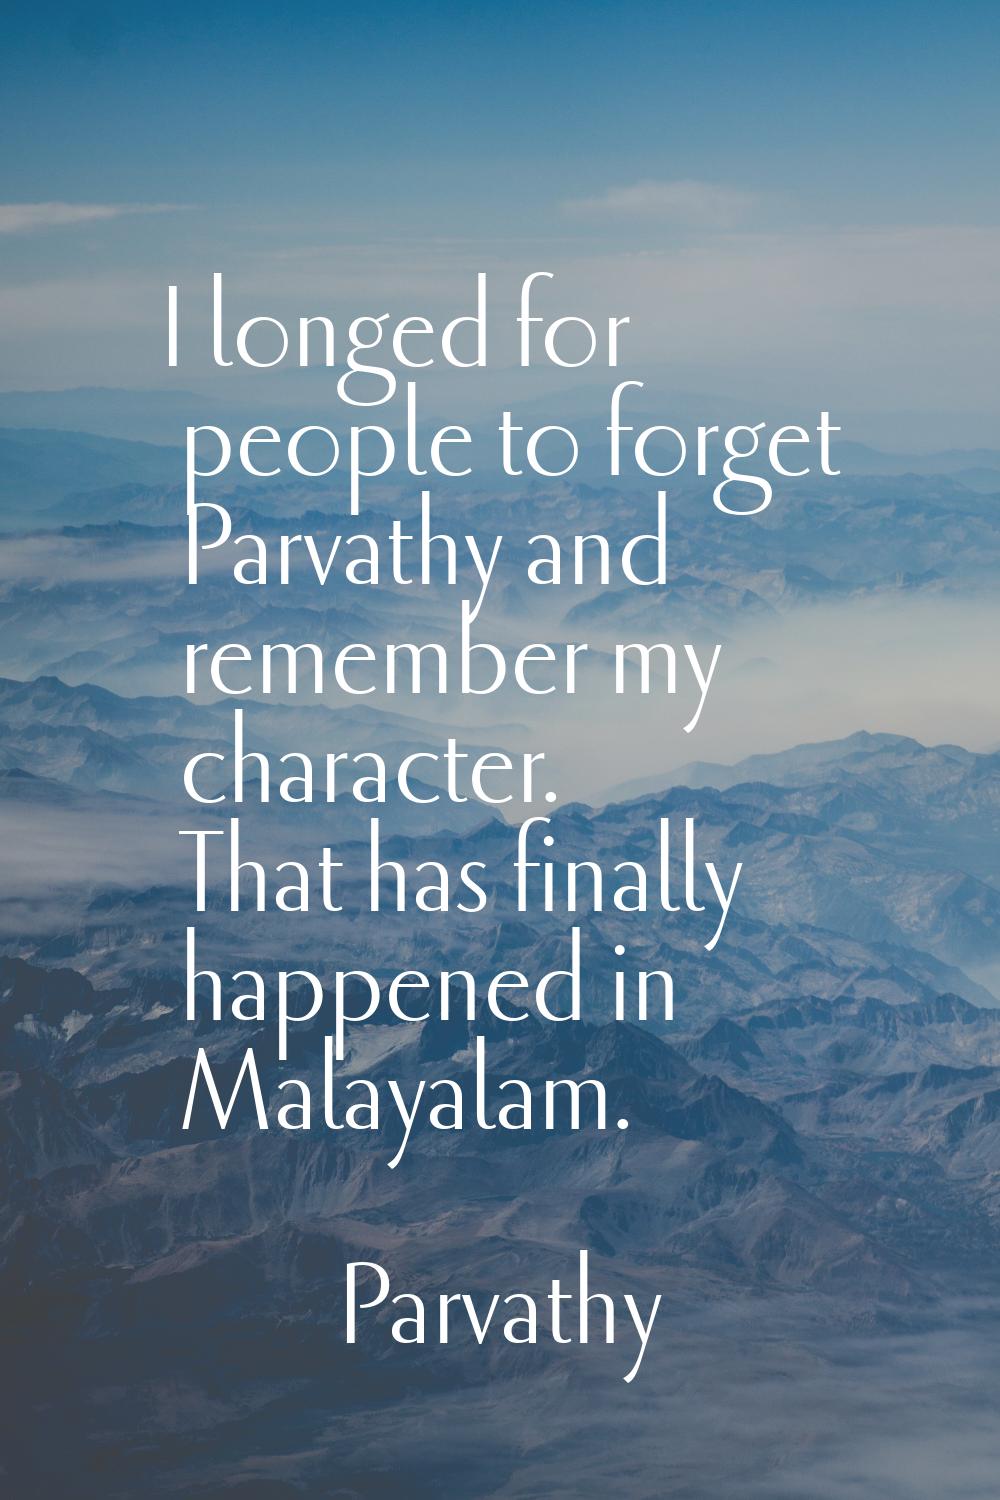 I longed for people to forget Parvathy and remember my character. That has finally happened in Mala